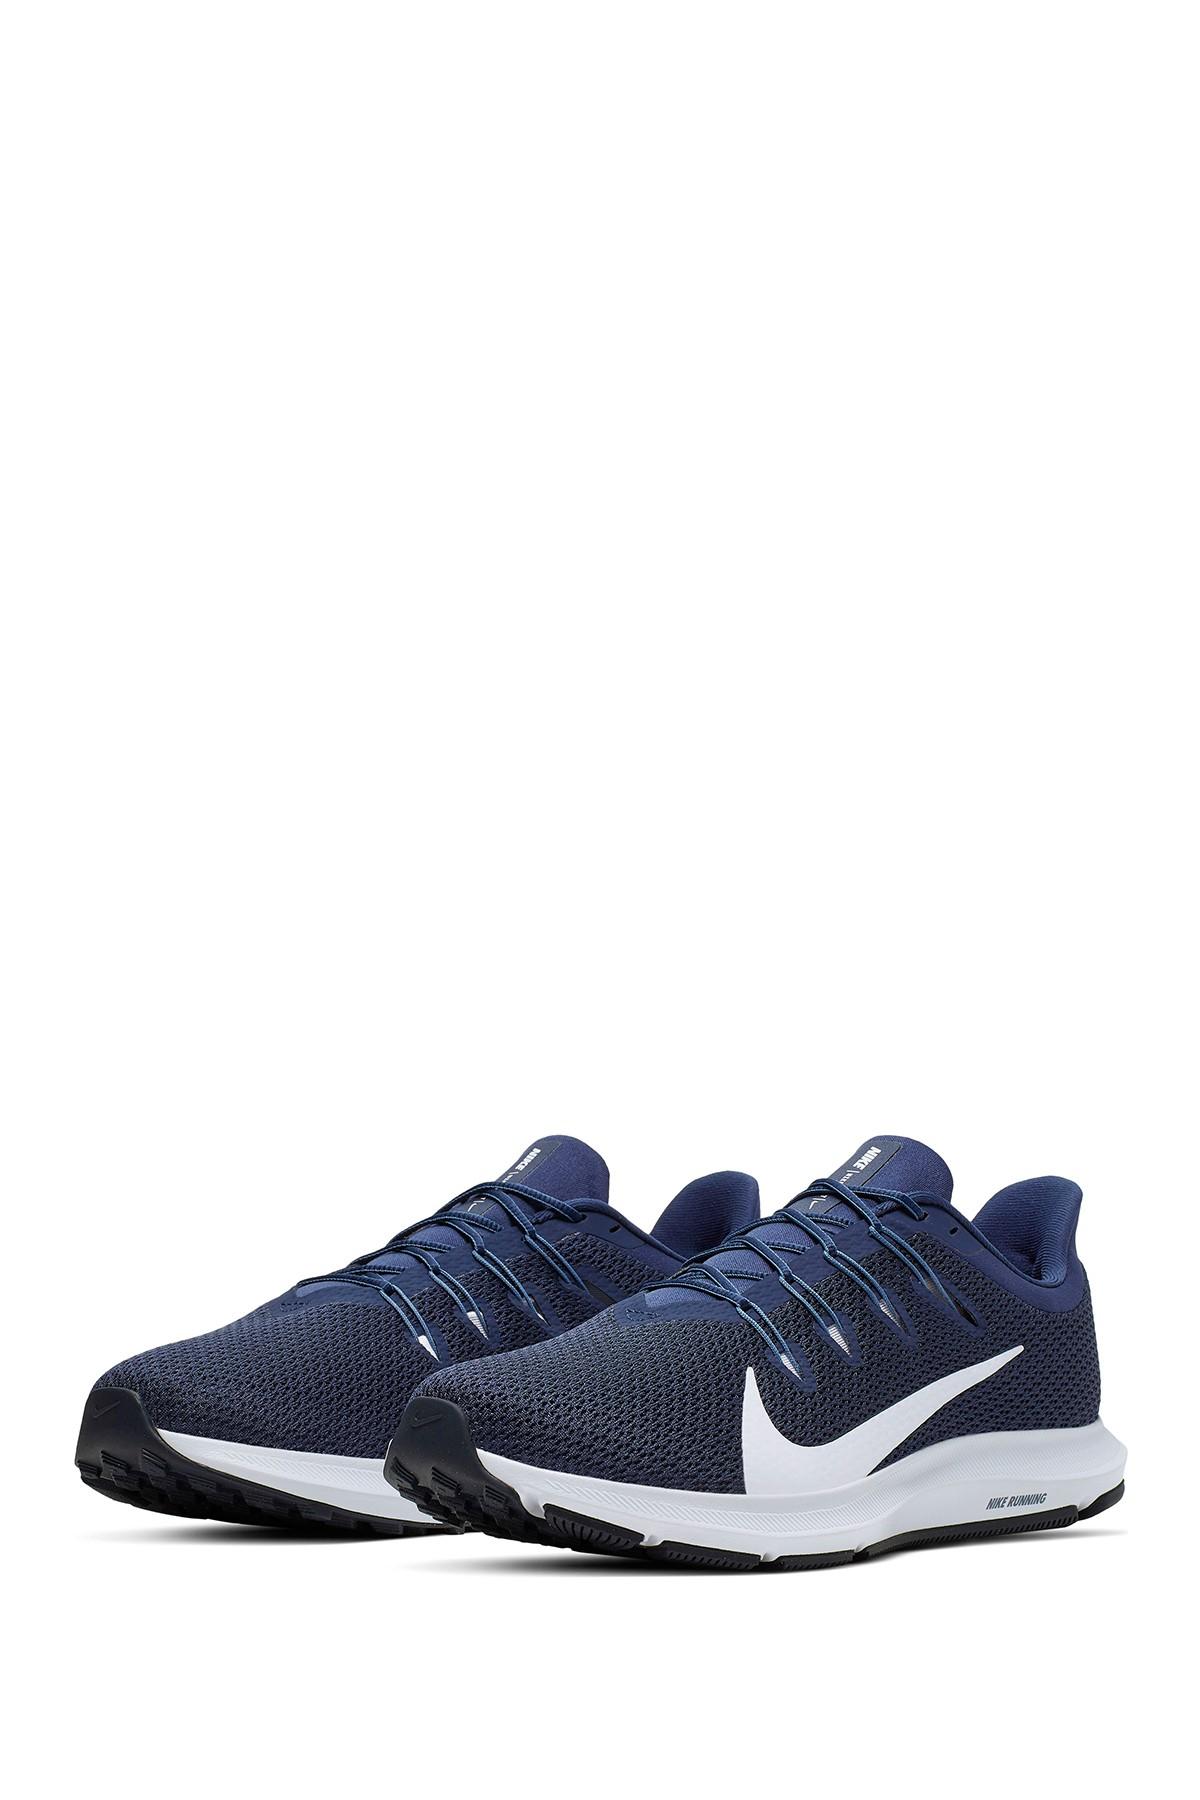 nike quest 2 navy